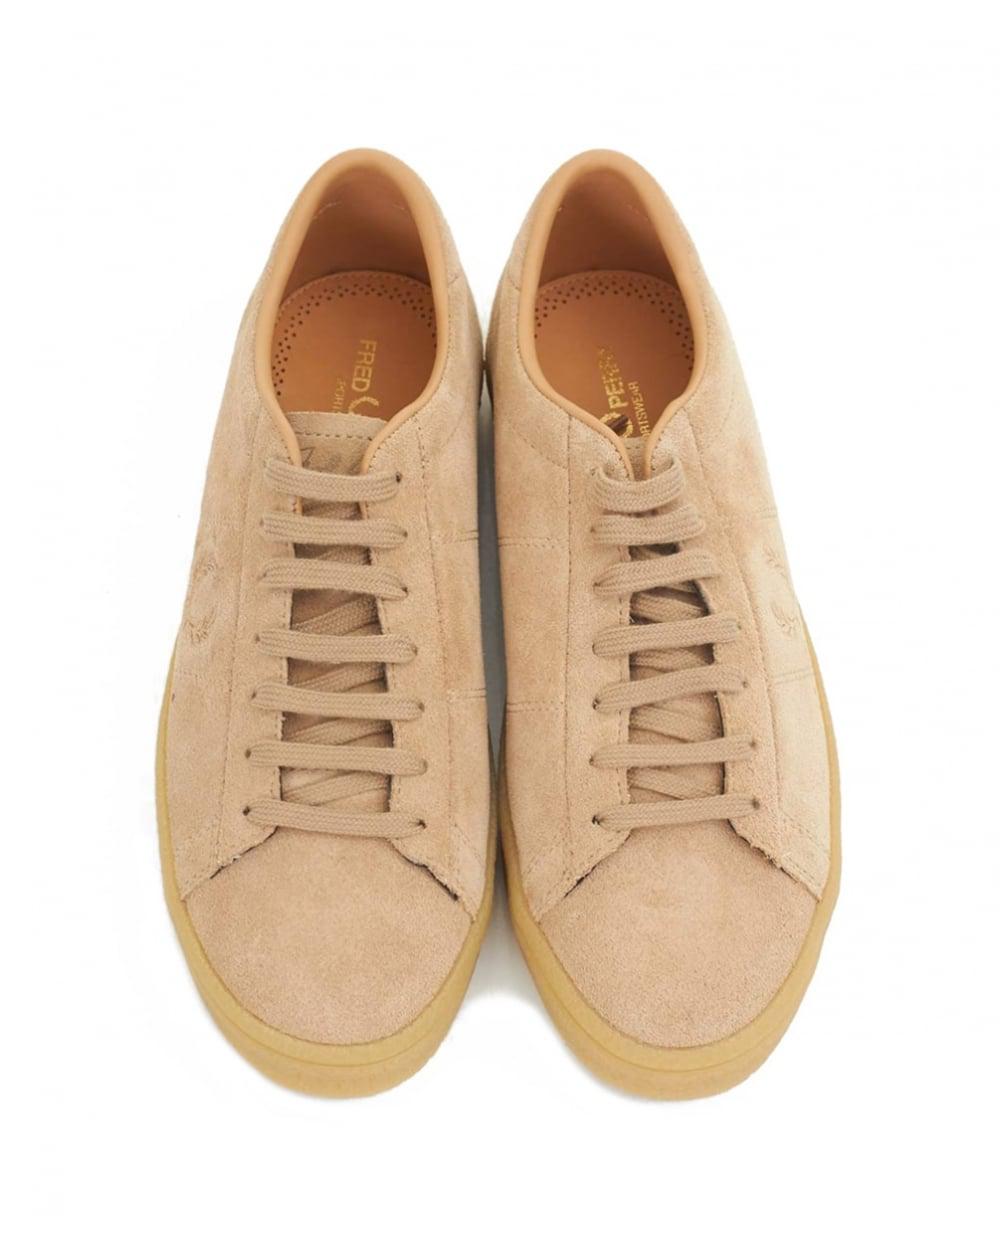 Lyst - Fred Perry Spencer Suede Crepe Shoes in Natural